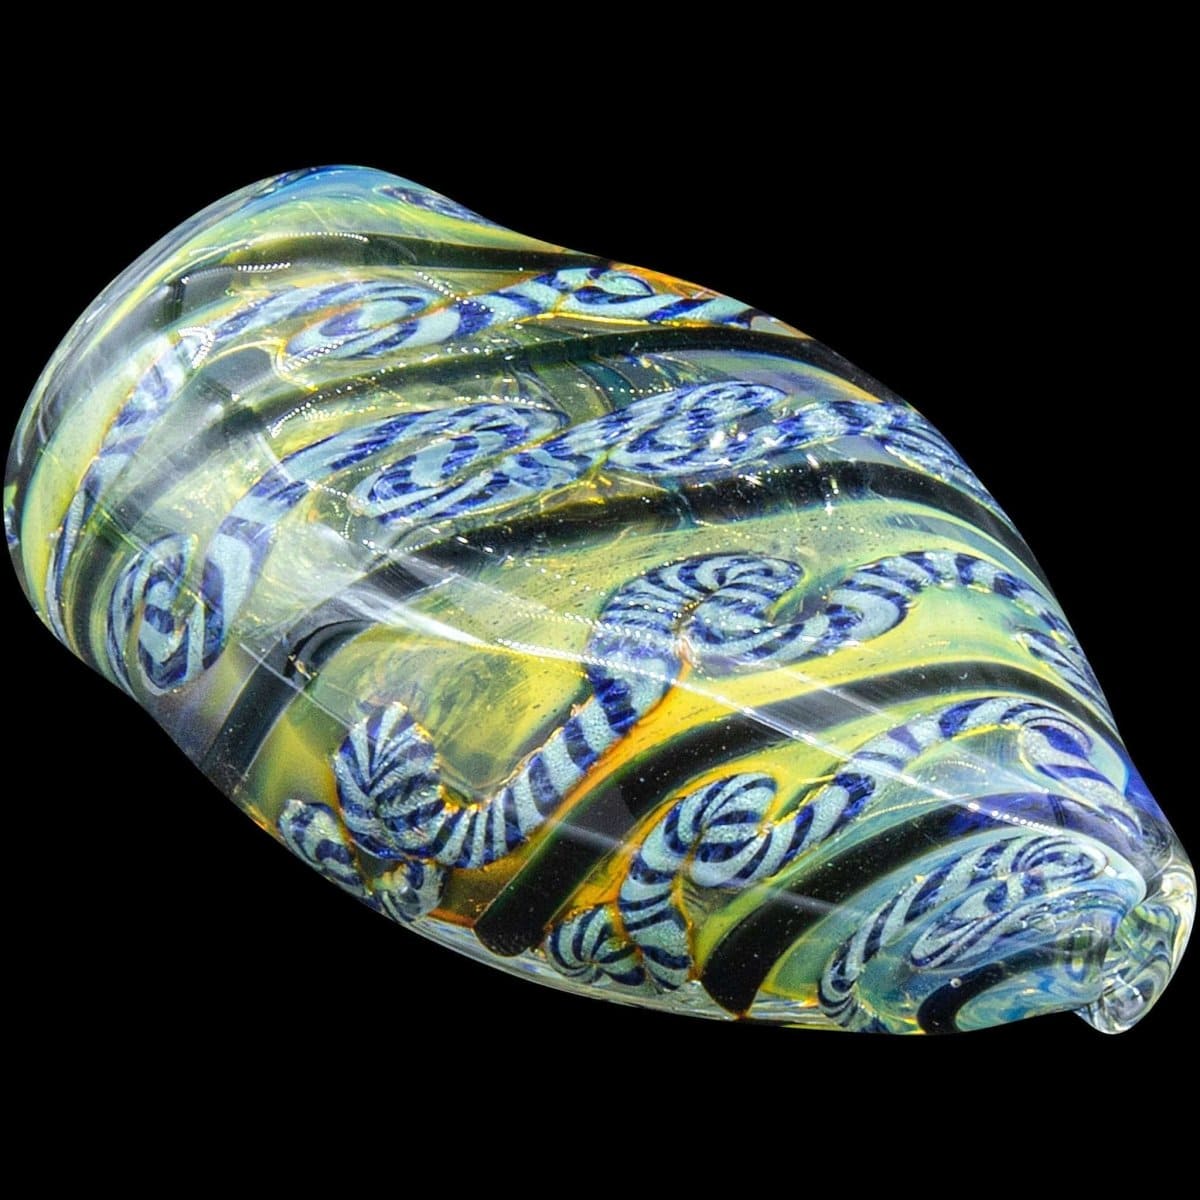 LA Pipes Hand Pipe Blue Hues "Skipping Stone" Inside-Out Chillum